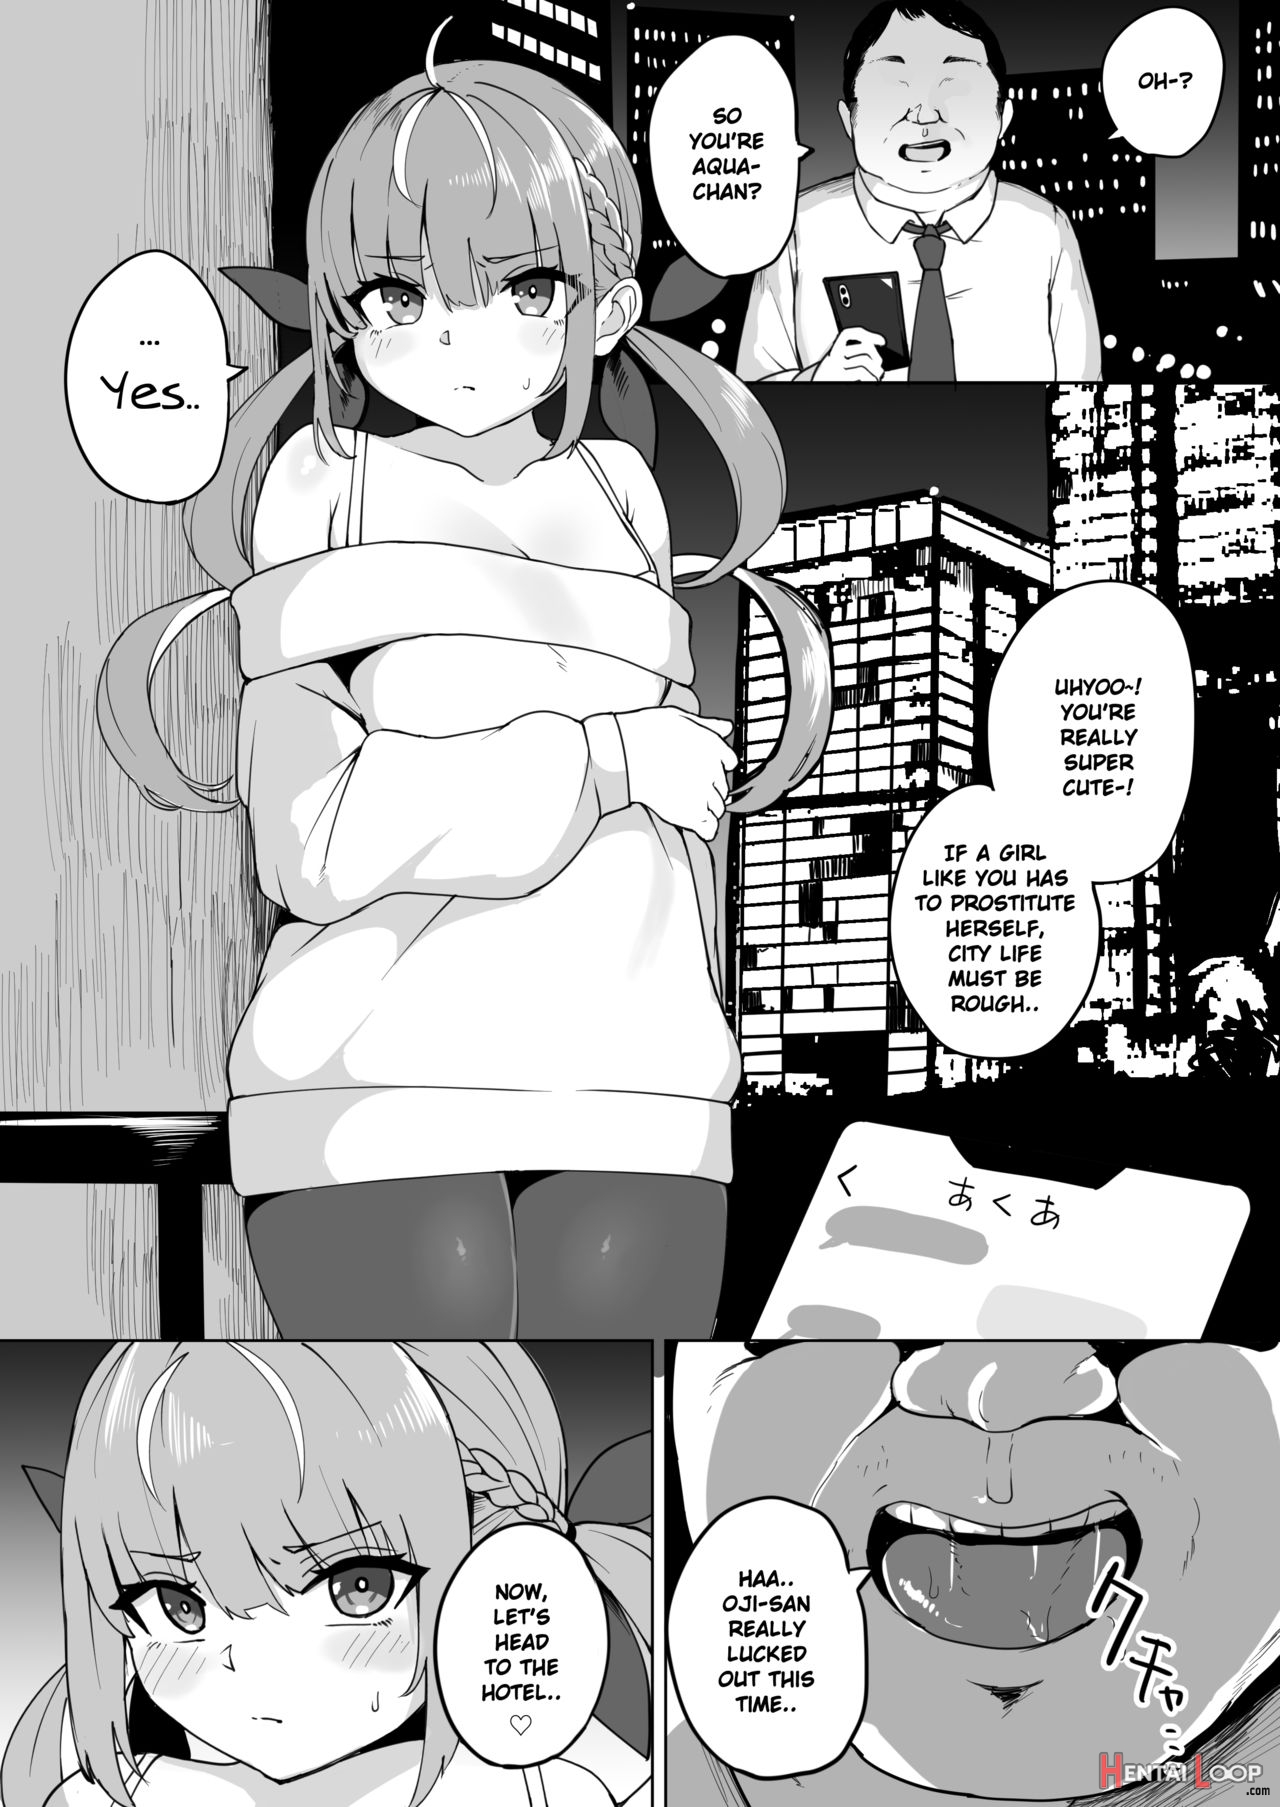 Aqua-chan, For Her Friend's Sake page 2